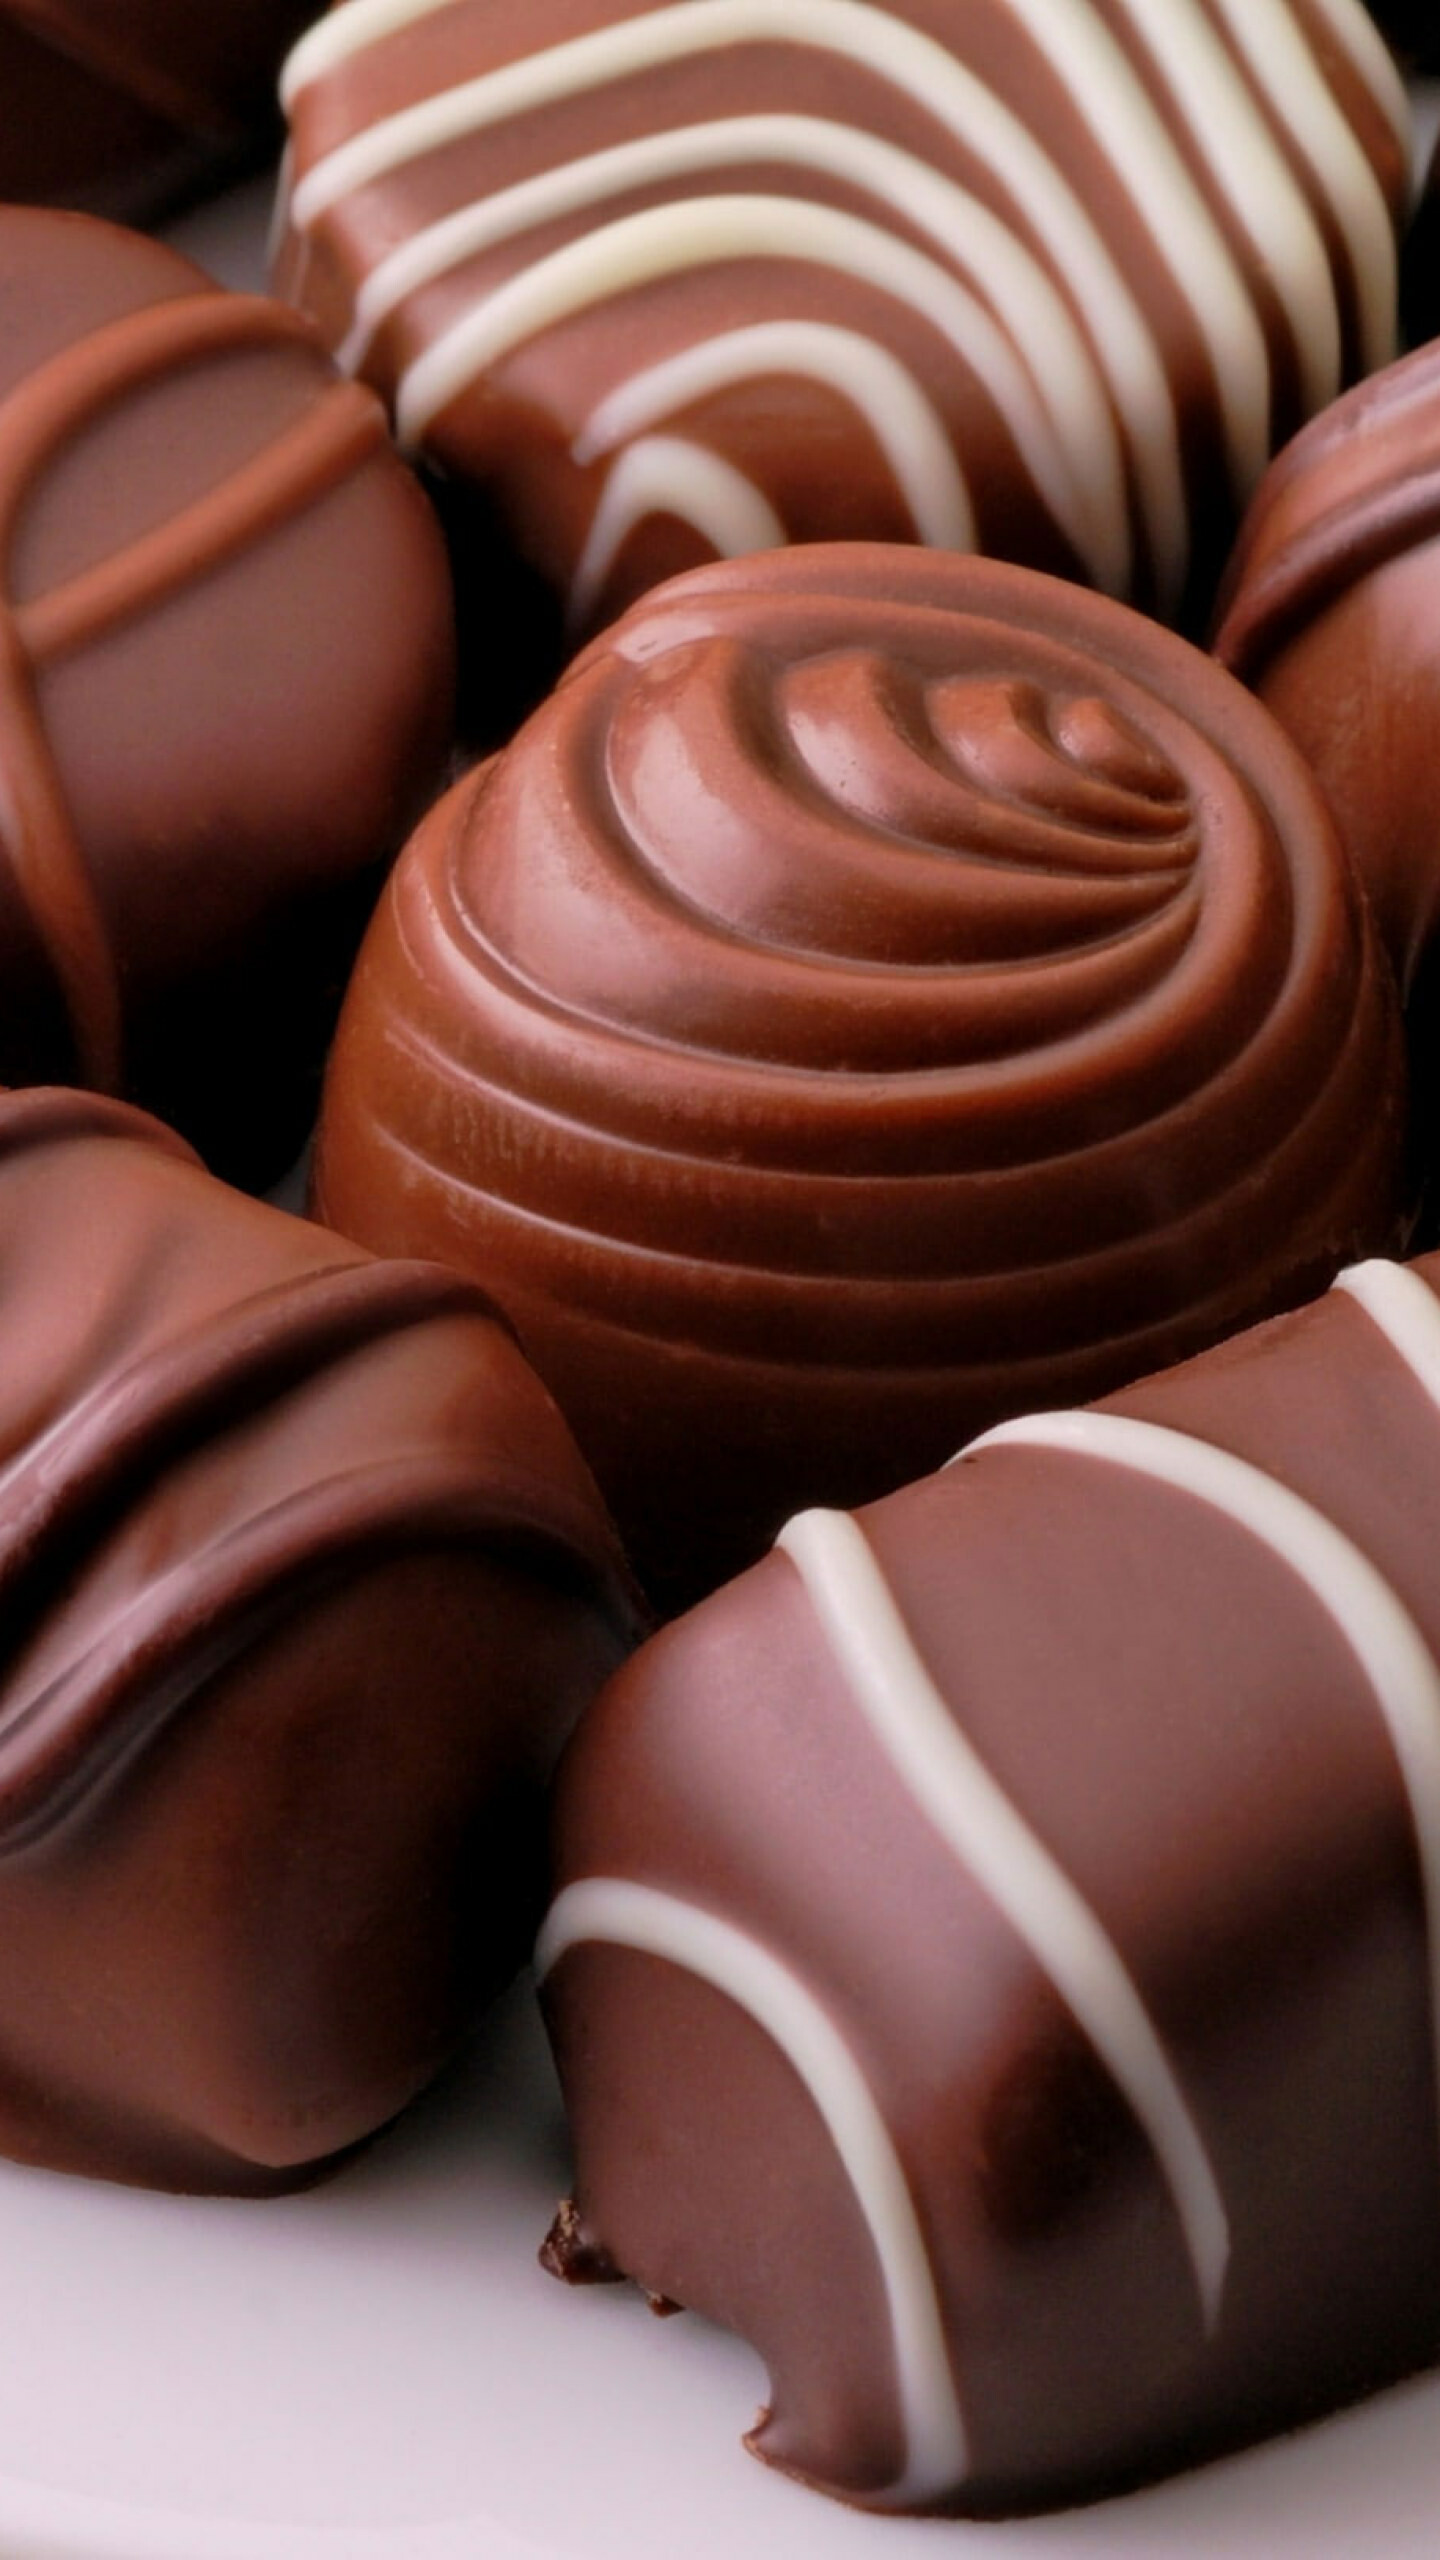 Sweets: Chocolate, Confectionery product, Bonbon. 1440x2560 HD Wallpaper.